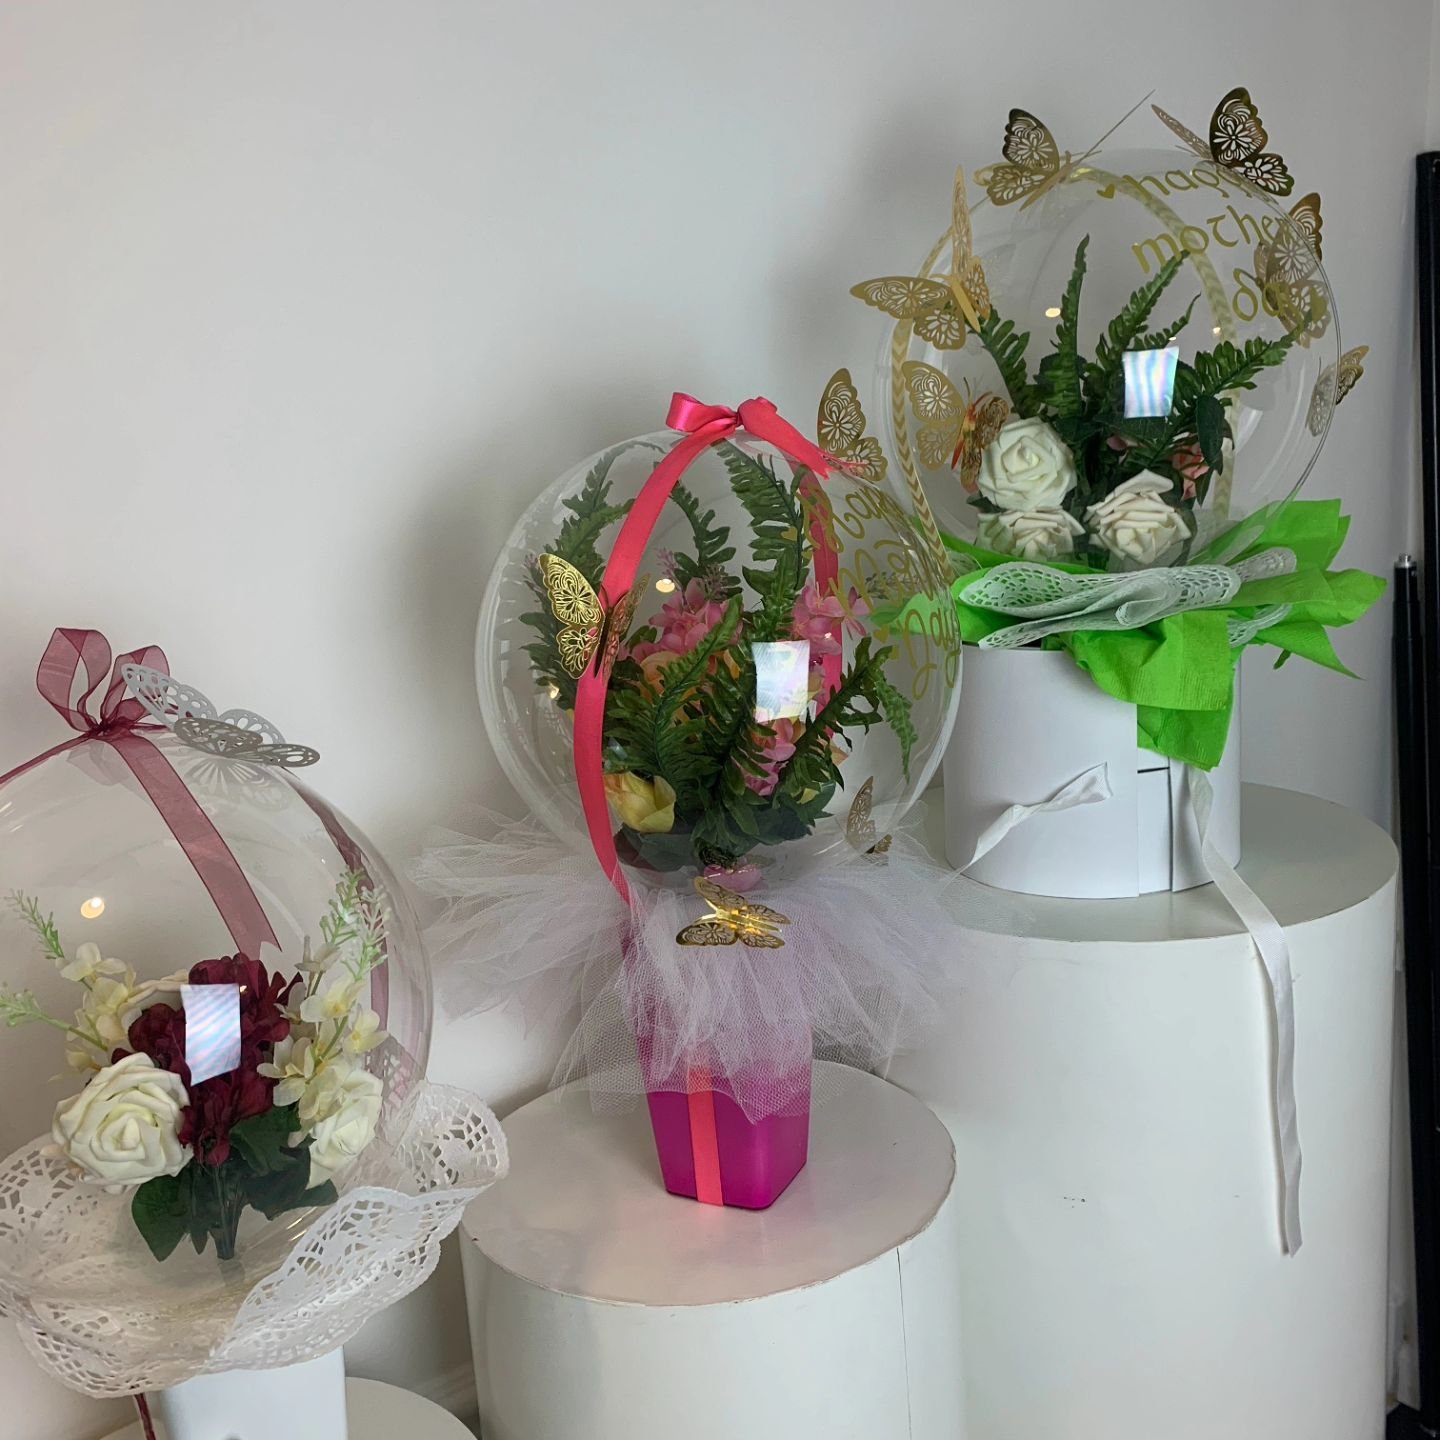 Order your Mothers Day balloons 

https://www.queensdecorllc.com/shop?tag=Mother%27s+Day
ABOUT US! 

𝙌𝙪𝙚𝙚𝙣𝙨 𝘿𝙚𝙘𝙤𝙧 is your party One . Stop . Shop! Located in Bristol pa. 

 Submit a quote via our website. Link in Boi, or call 215.550.1481 